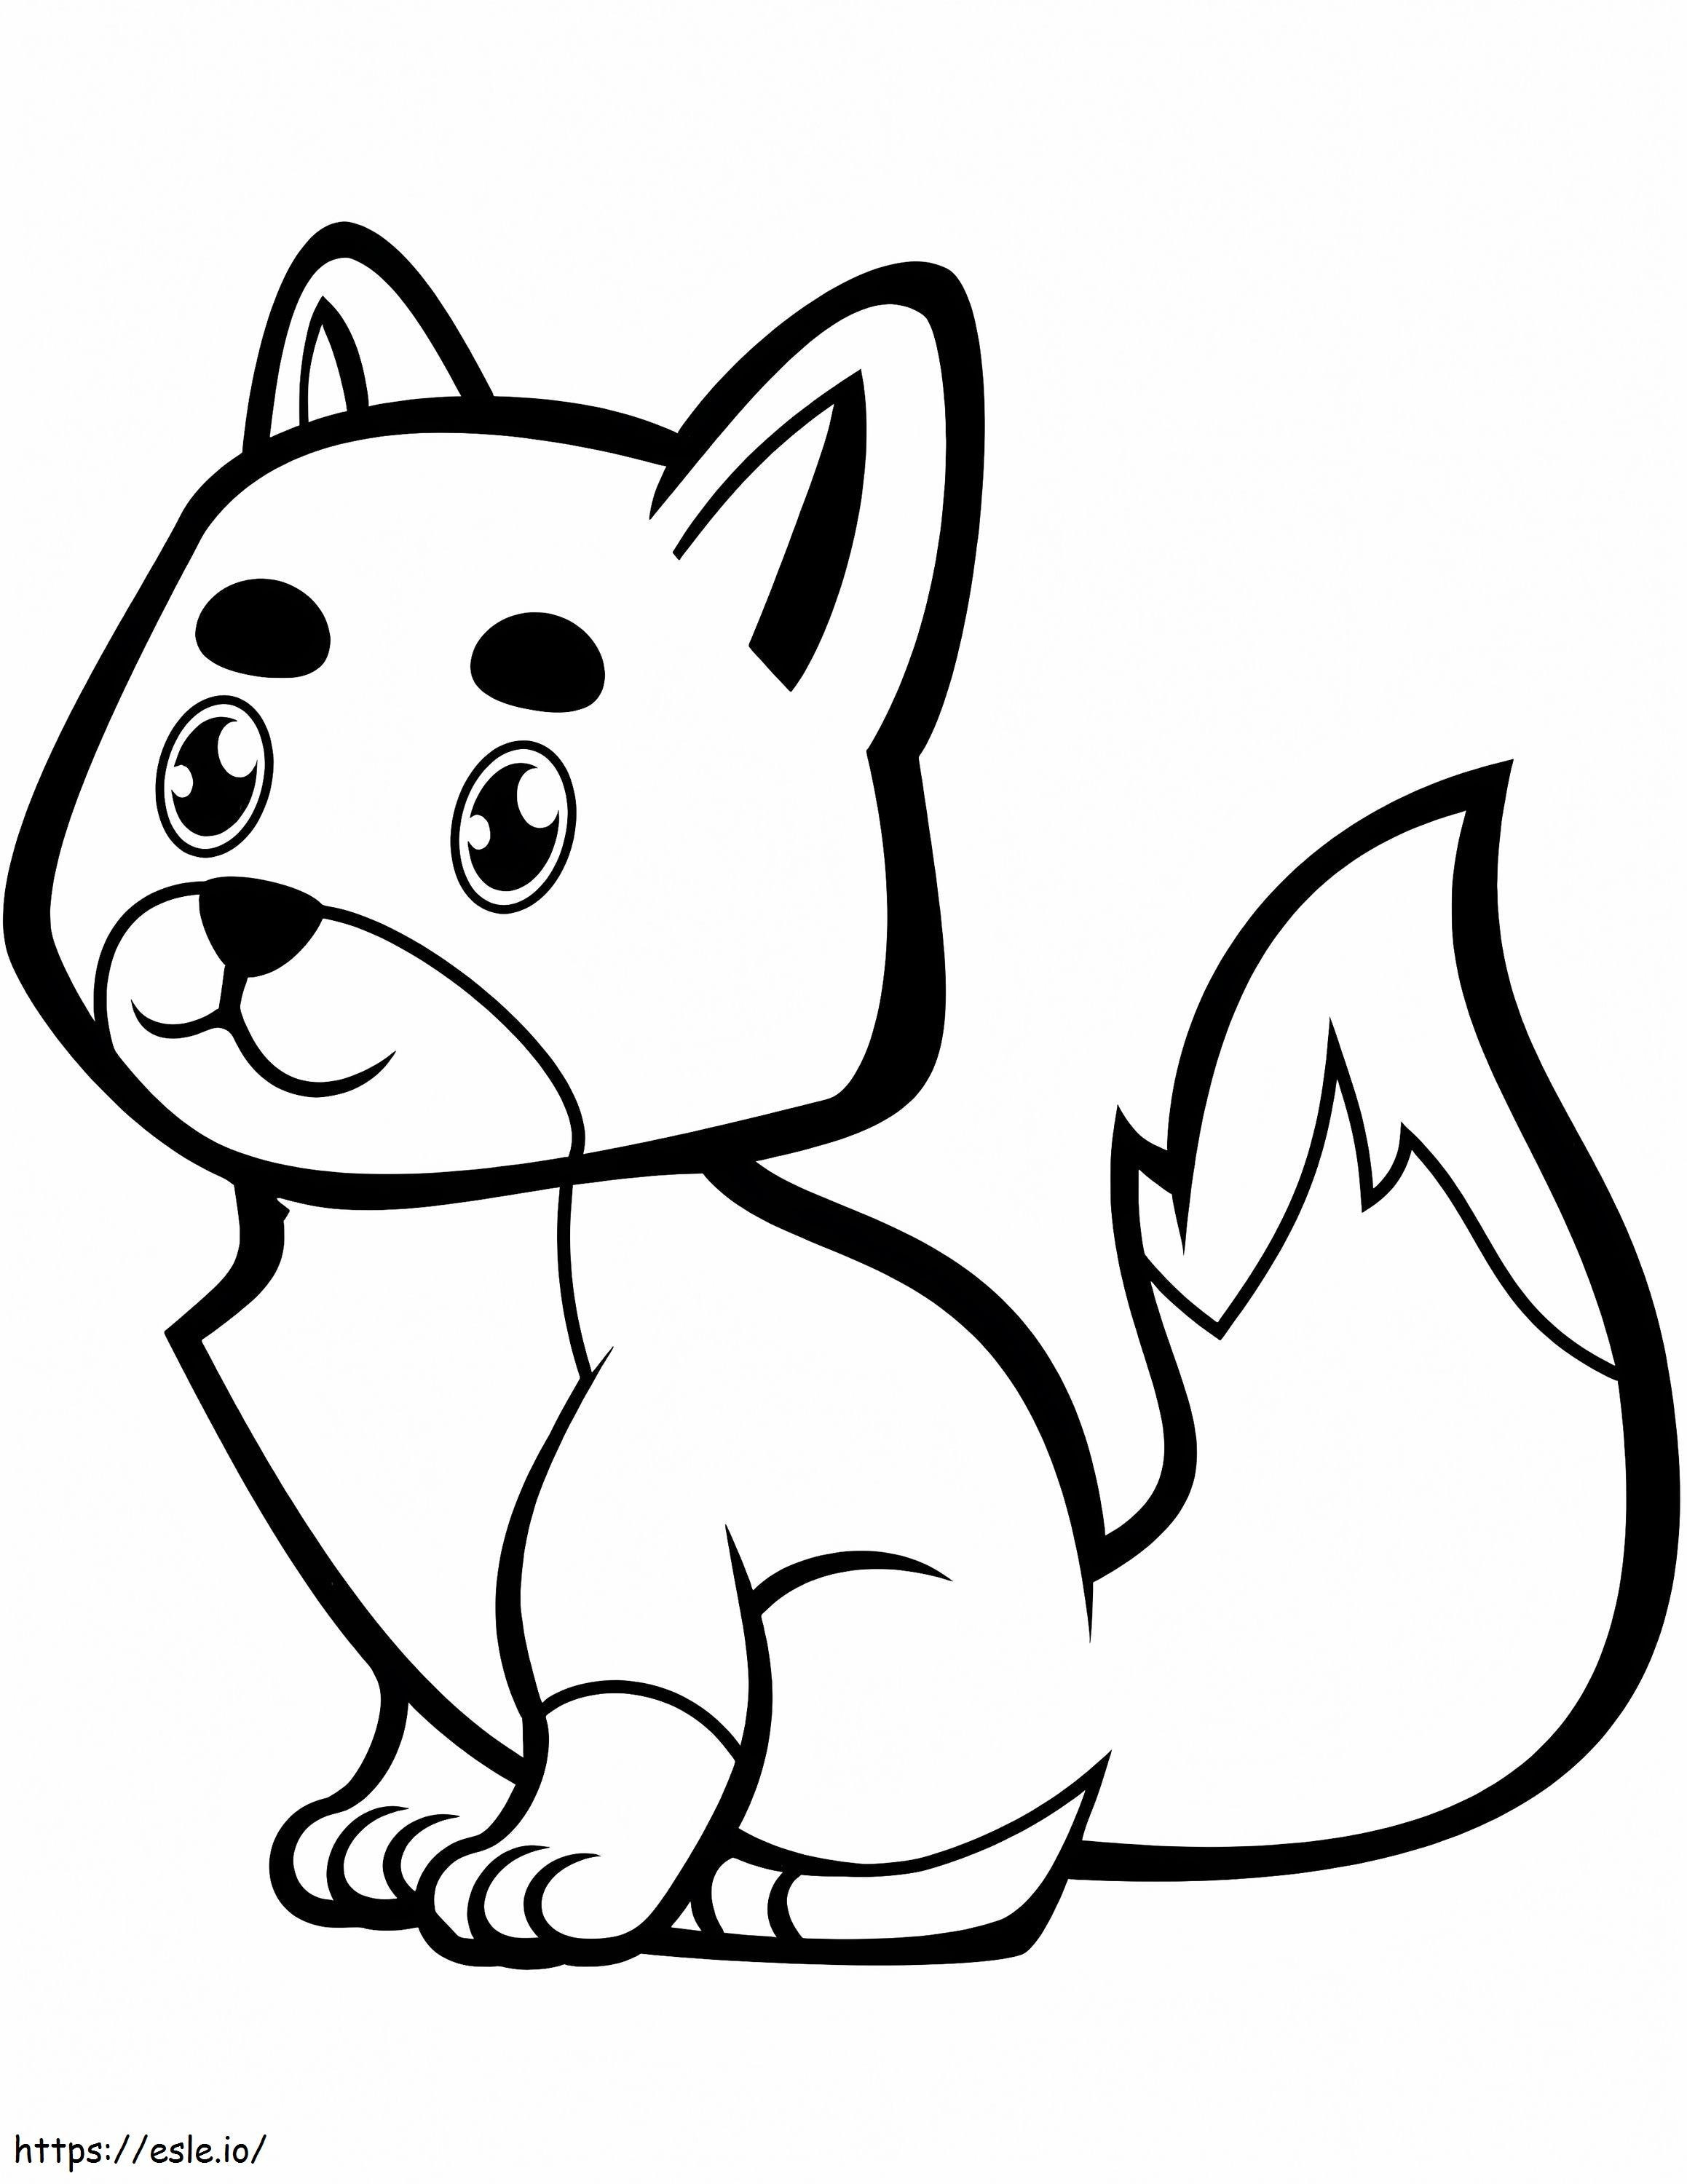 A Cute Fox coloring page